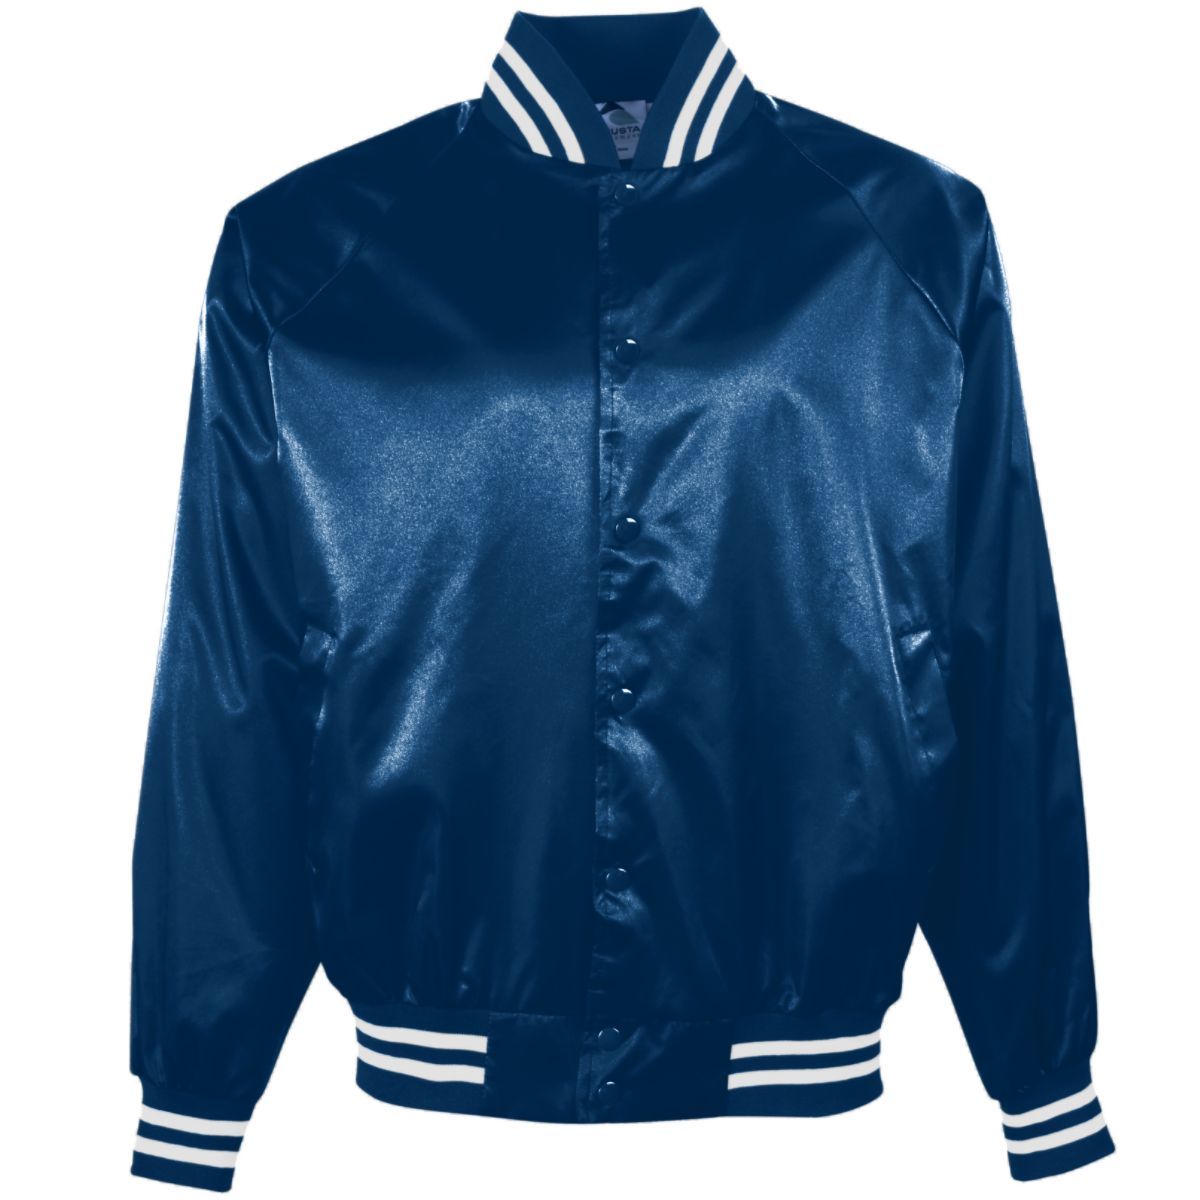 Augusta Sportswear Satin Baseball Jacket/Striped Trim in Navy/White  -Part of the Adult, Adult-Jacket, Augusta-Products, Baseball, Outerwear, All-Sports, All-Sports-1 product lines at KanaleyCreations.com